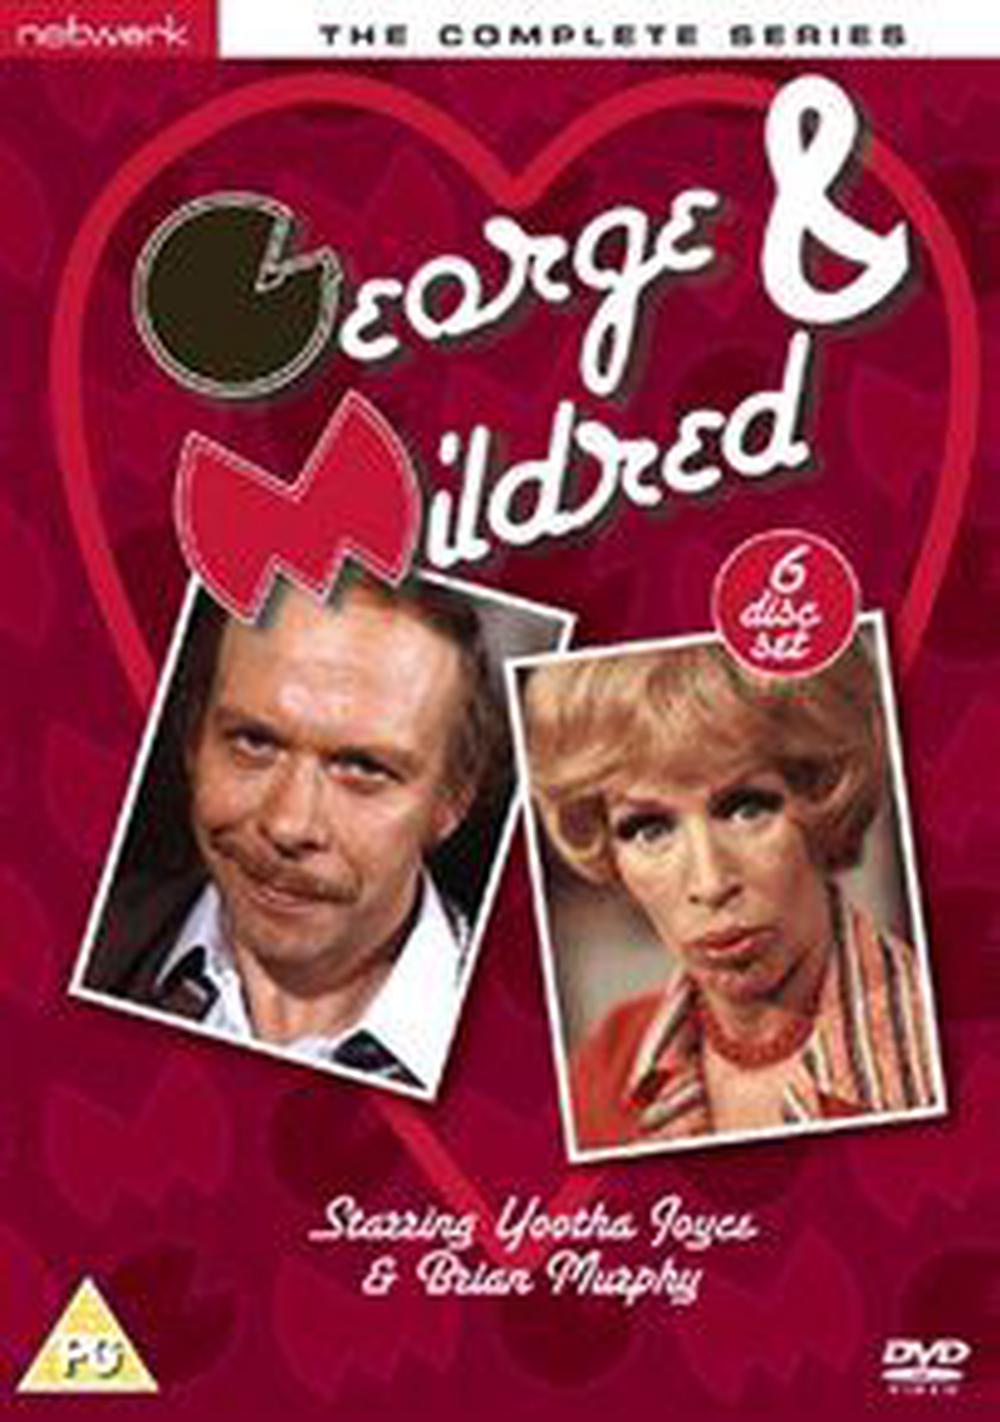 George And Mildred The Complete Series Dvd Region 2 Free Shipping 5027626284343 Ebay 5759